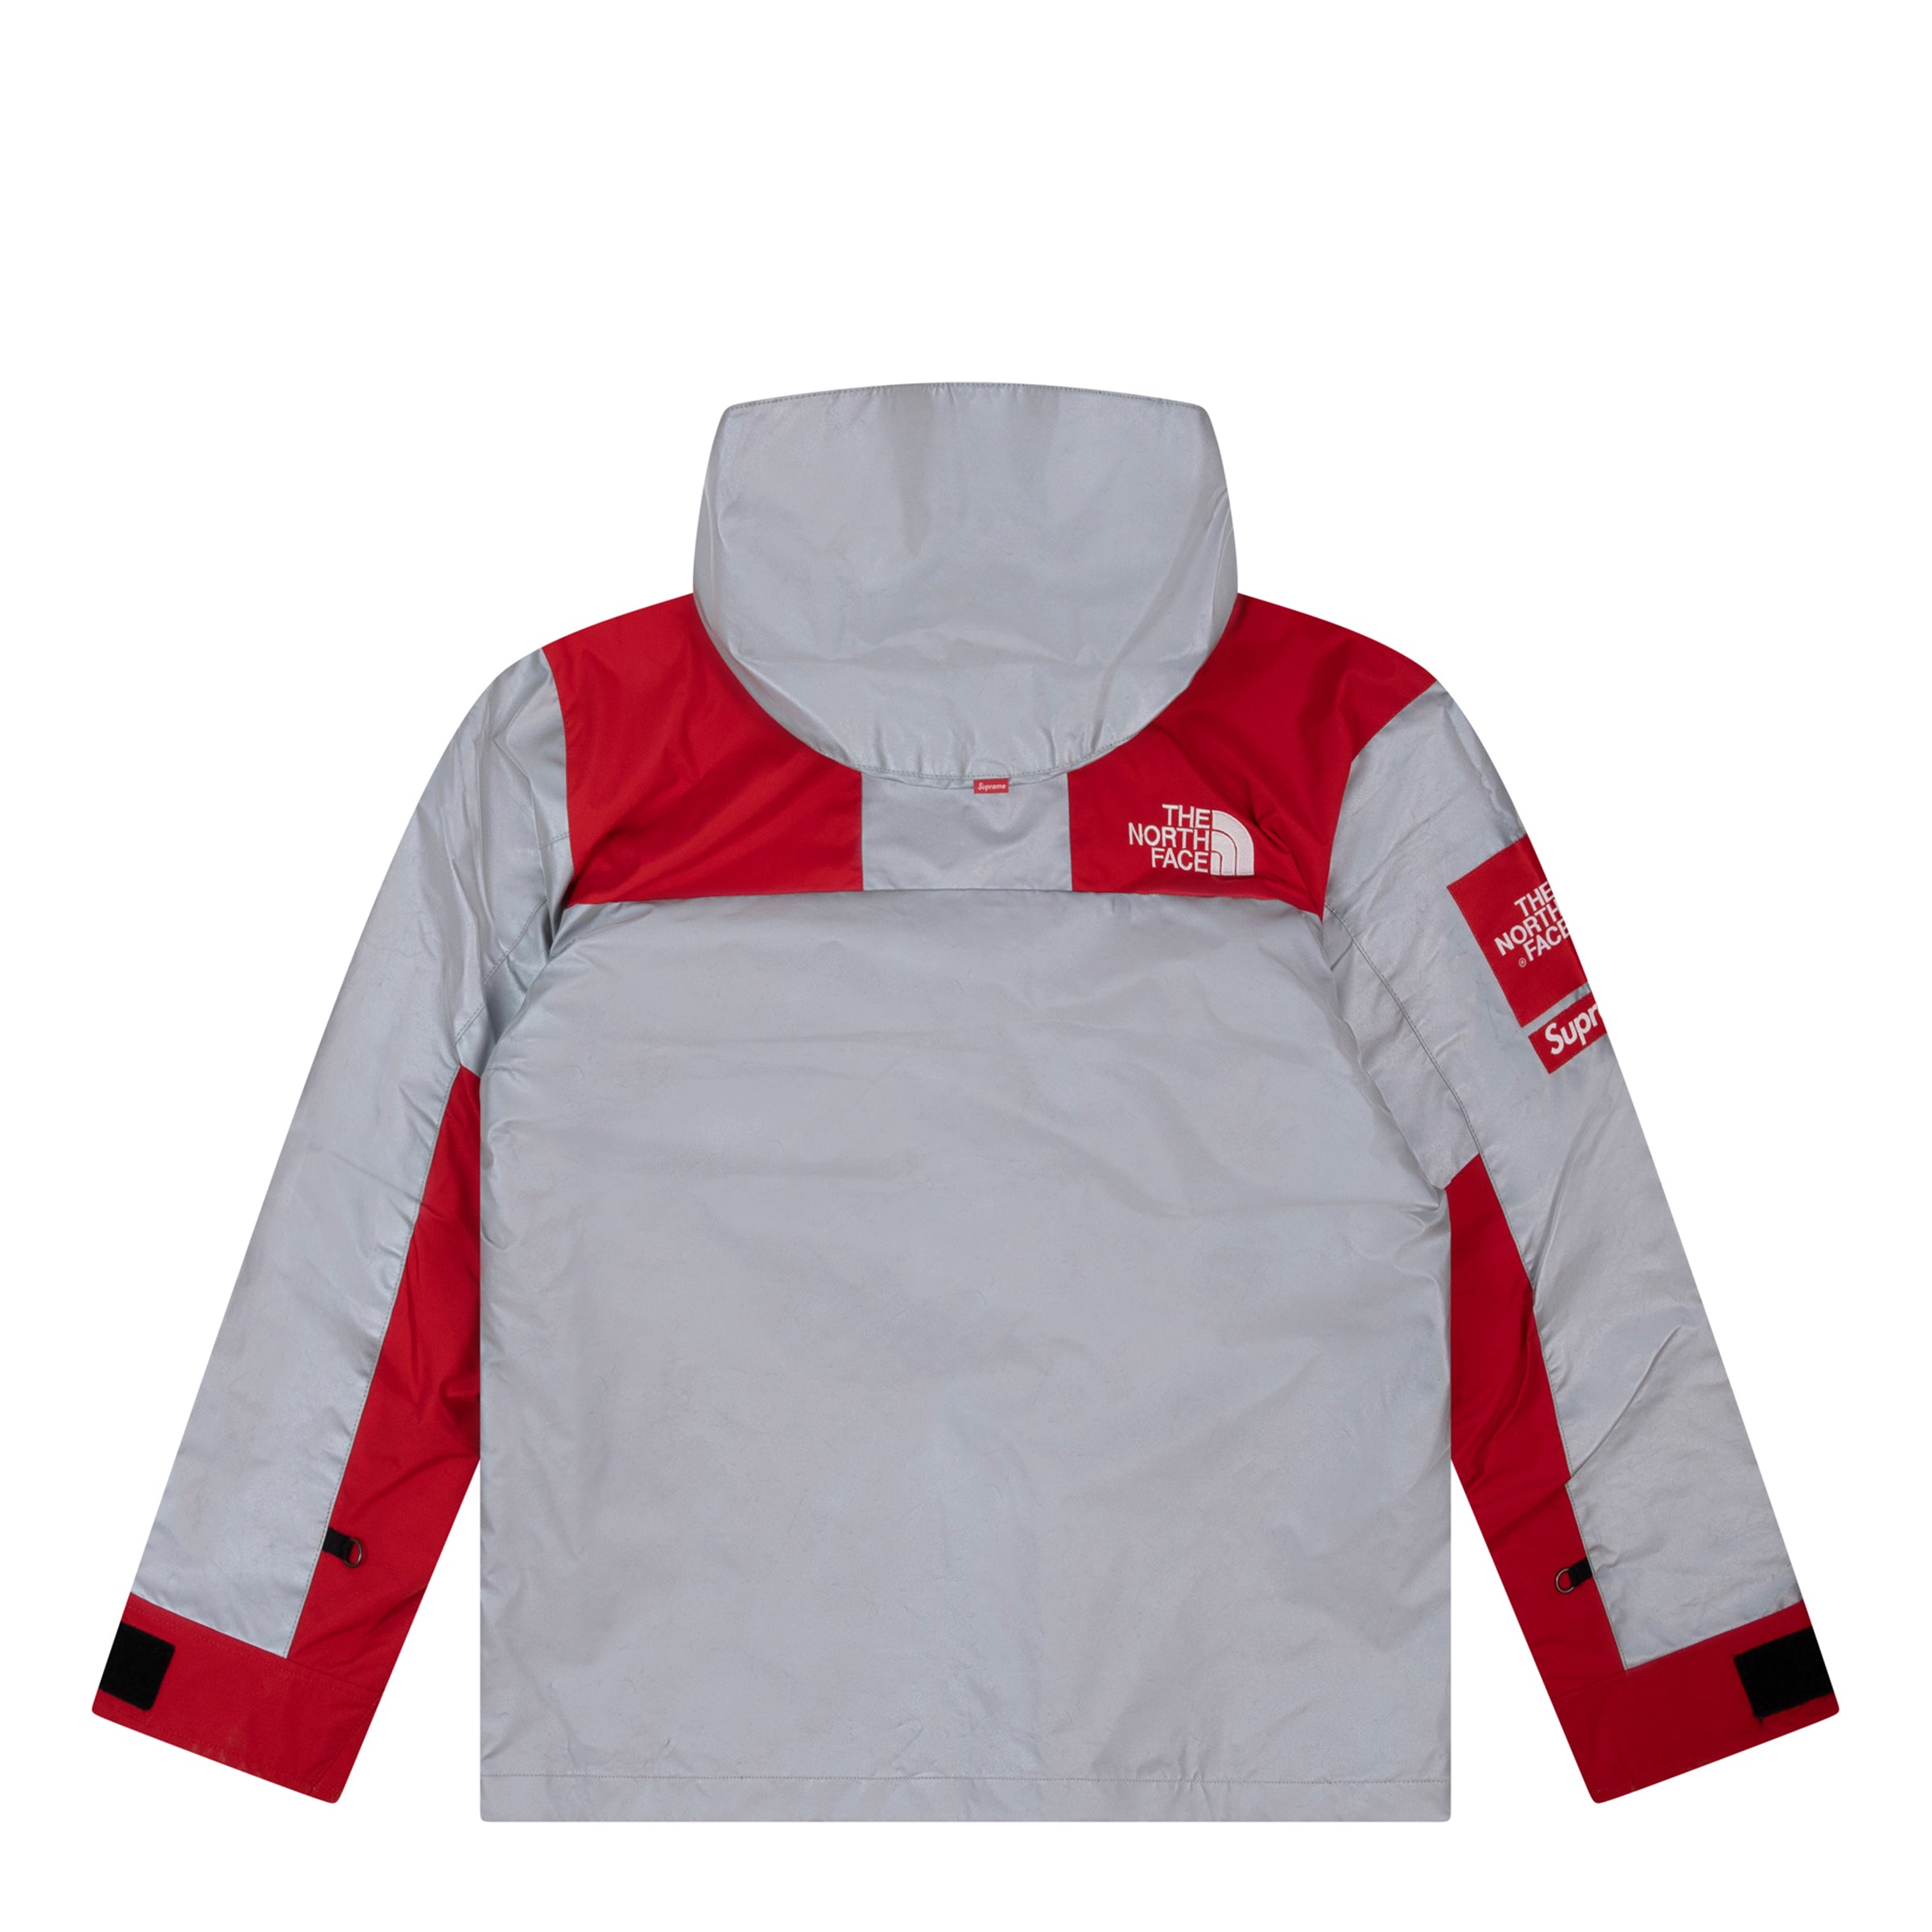 SUPREME THE NORTH FACE 3M REFLECTIVE MOUNTAIN JACKET RED